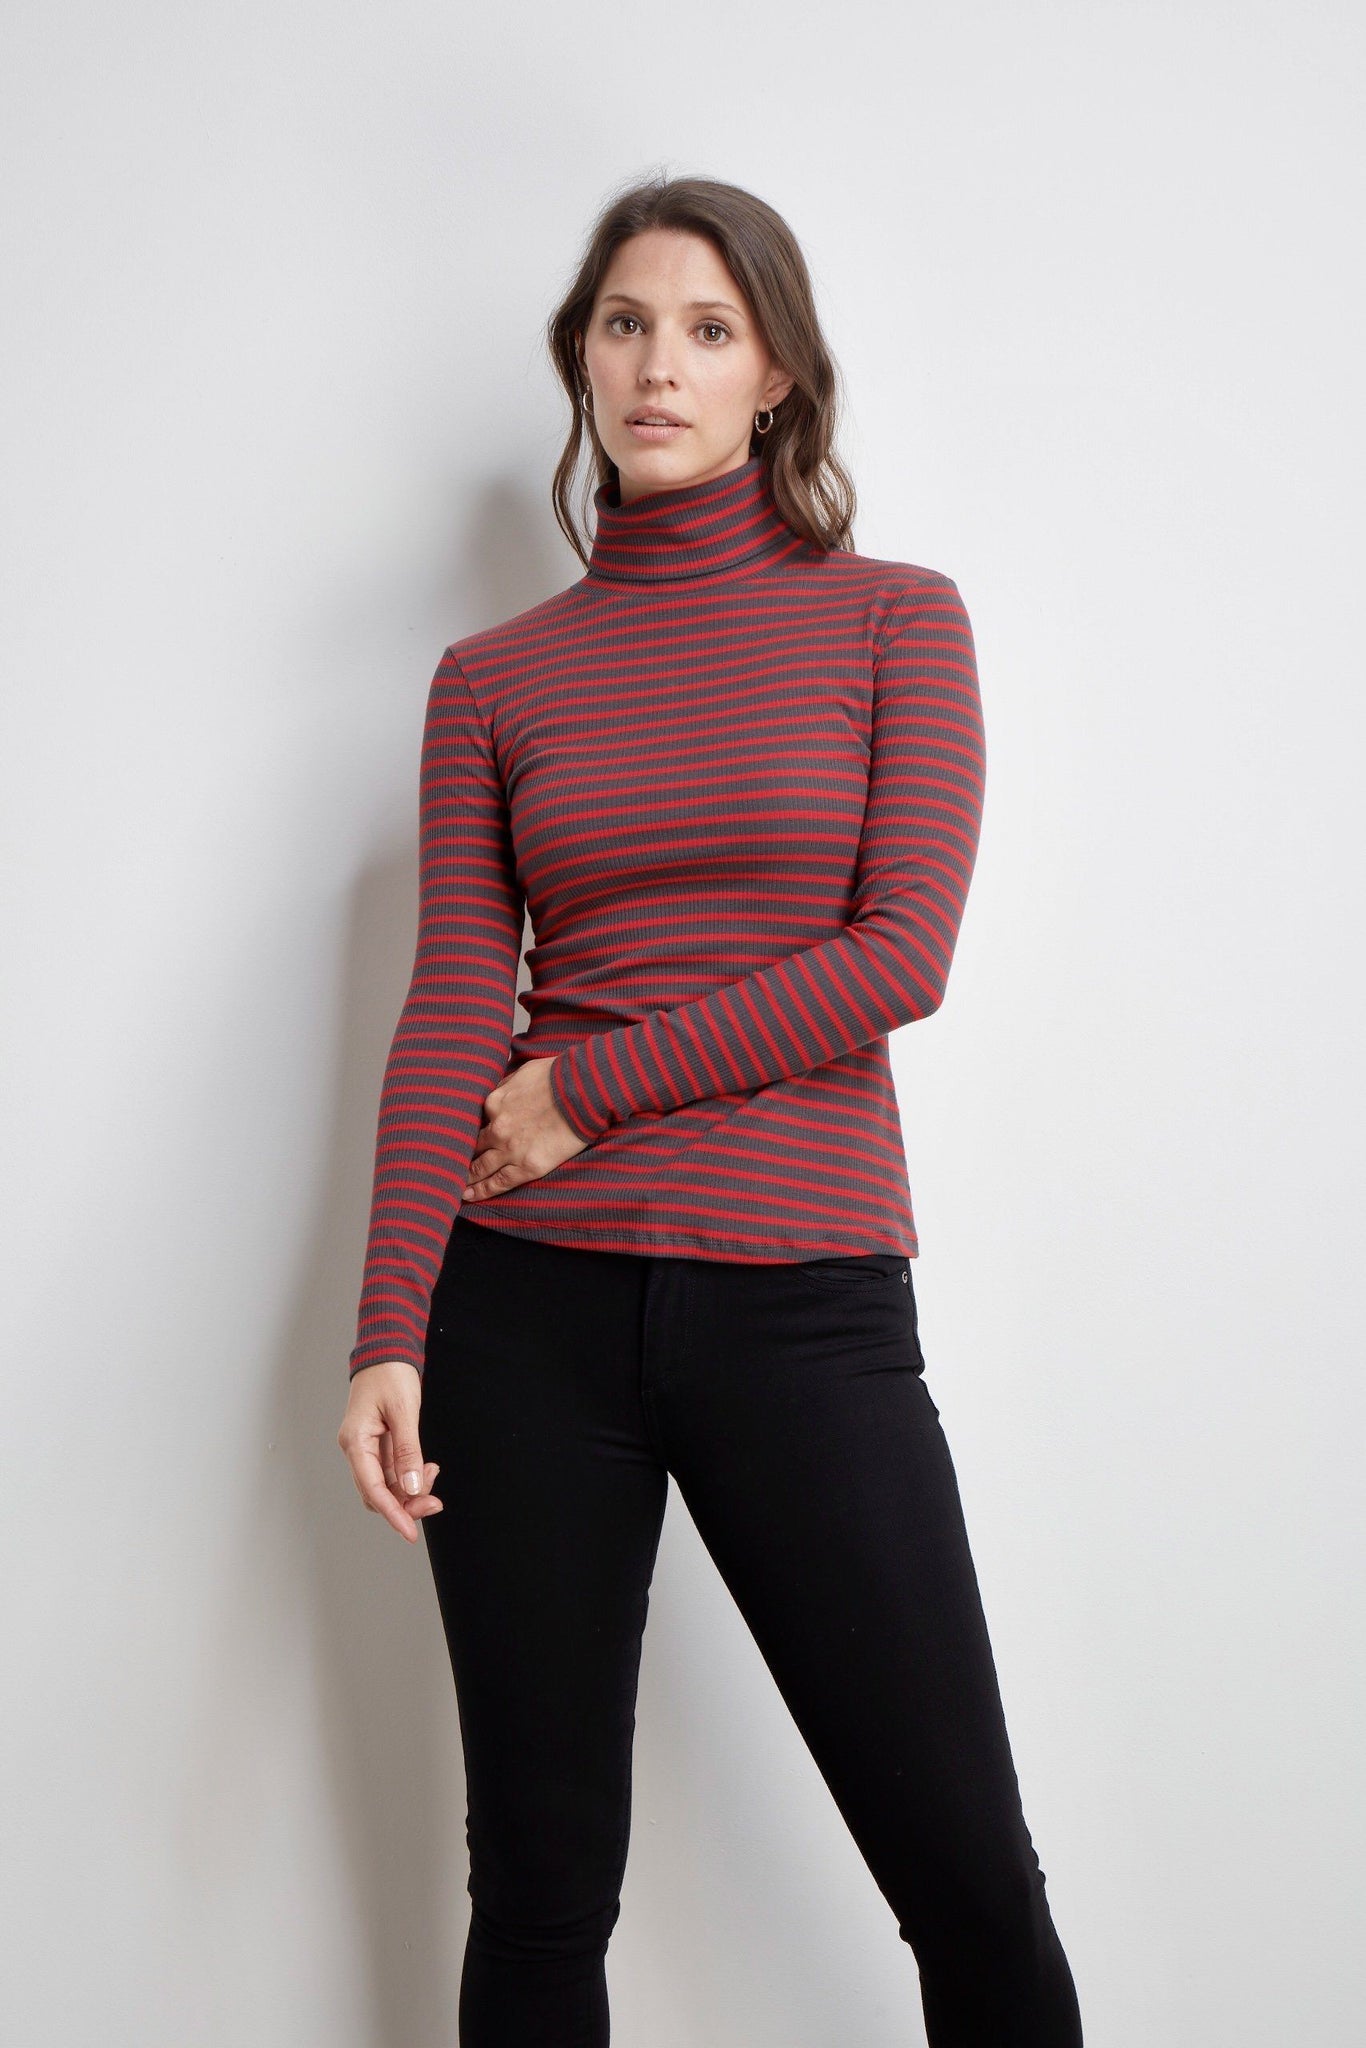 Striped Cotton Roll Neck Long Sleeve Top - Women's Stripe Cotton Long Sleeve Top in Red and Grey - Quality Roll Neck Top - Lavender Hill Clothing